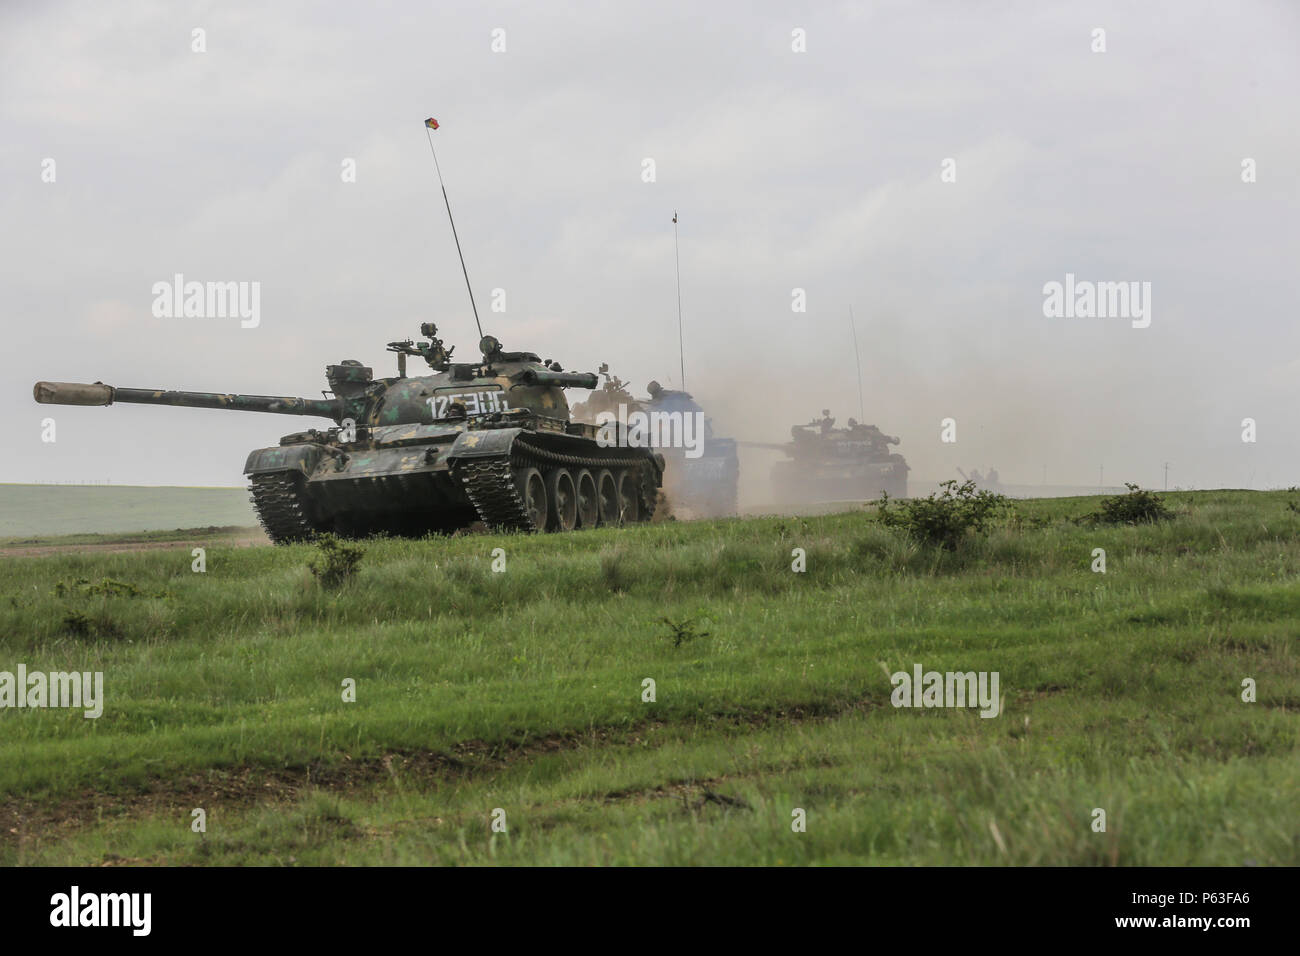 Romanian soldiers move their T-55 Tanks to the next objective during a live-fire exercise during Platinum Lynx 16-4 aboard Babadag Training Area, Romania, April 21, 2016. The purpose behind Platinum Lynx is to improve readiness and increase Marines’ ability to work seamlessly with other NATO and partner nations around the world. (U.S. Marine Corps photo by Cpl. Immanuel M. Johnson/Released) Stock Photo